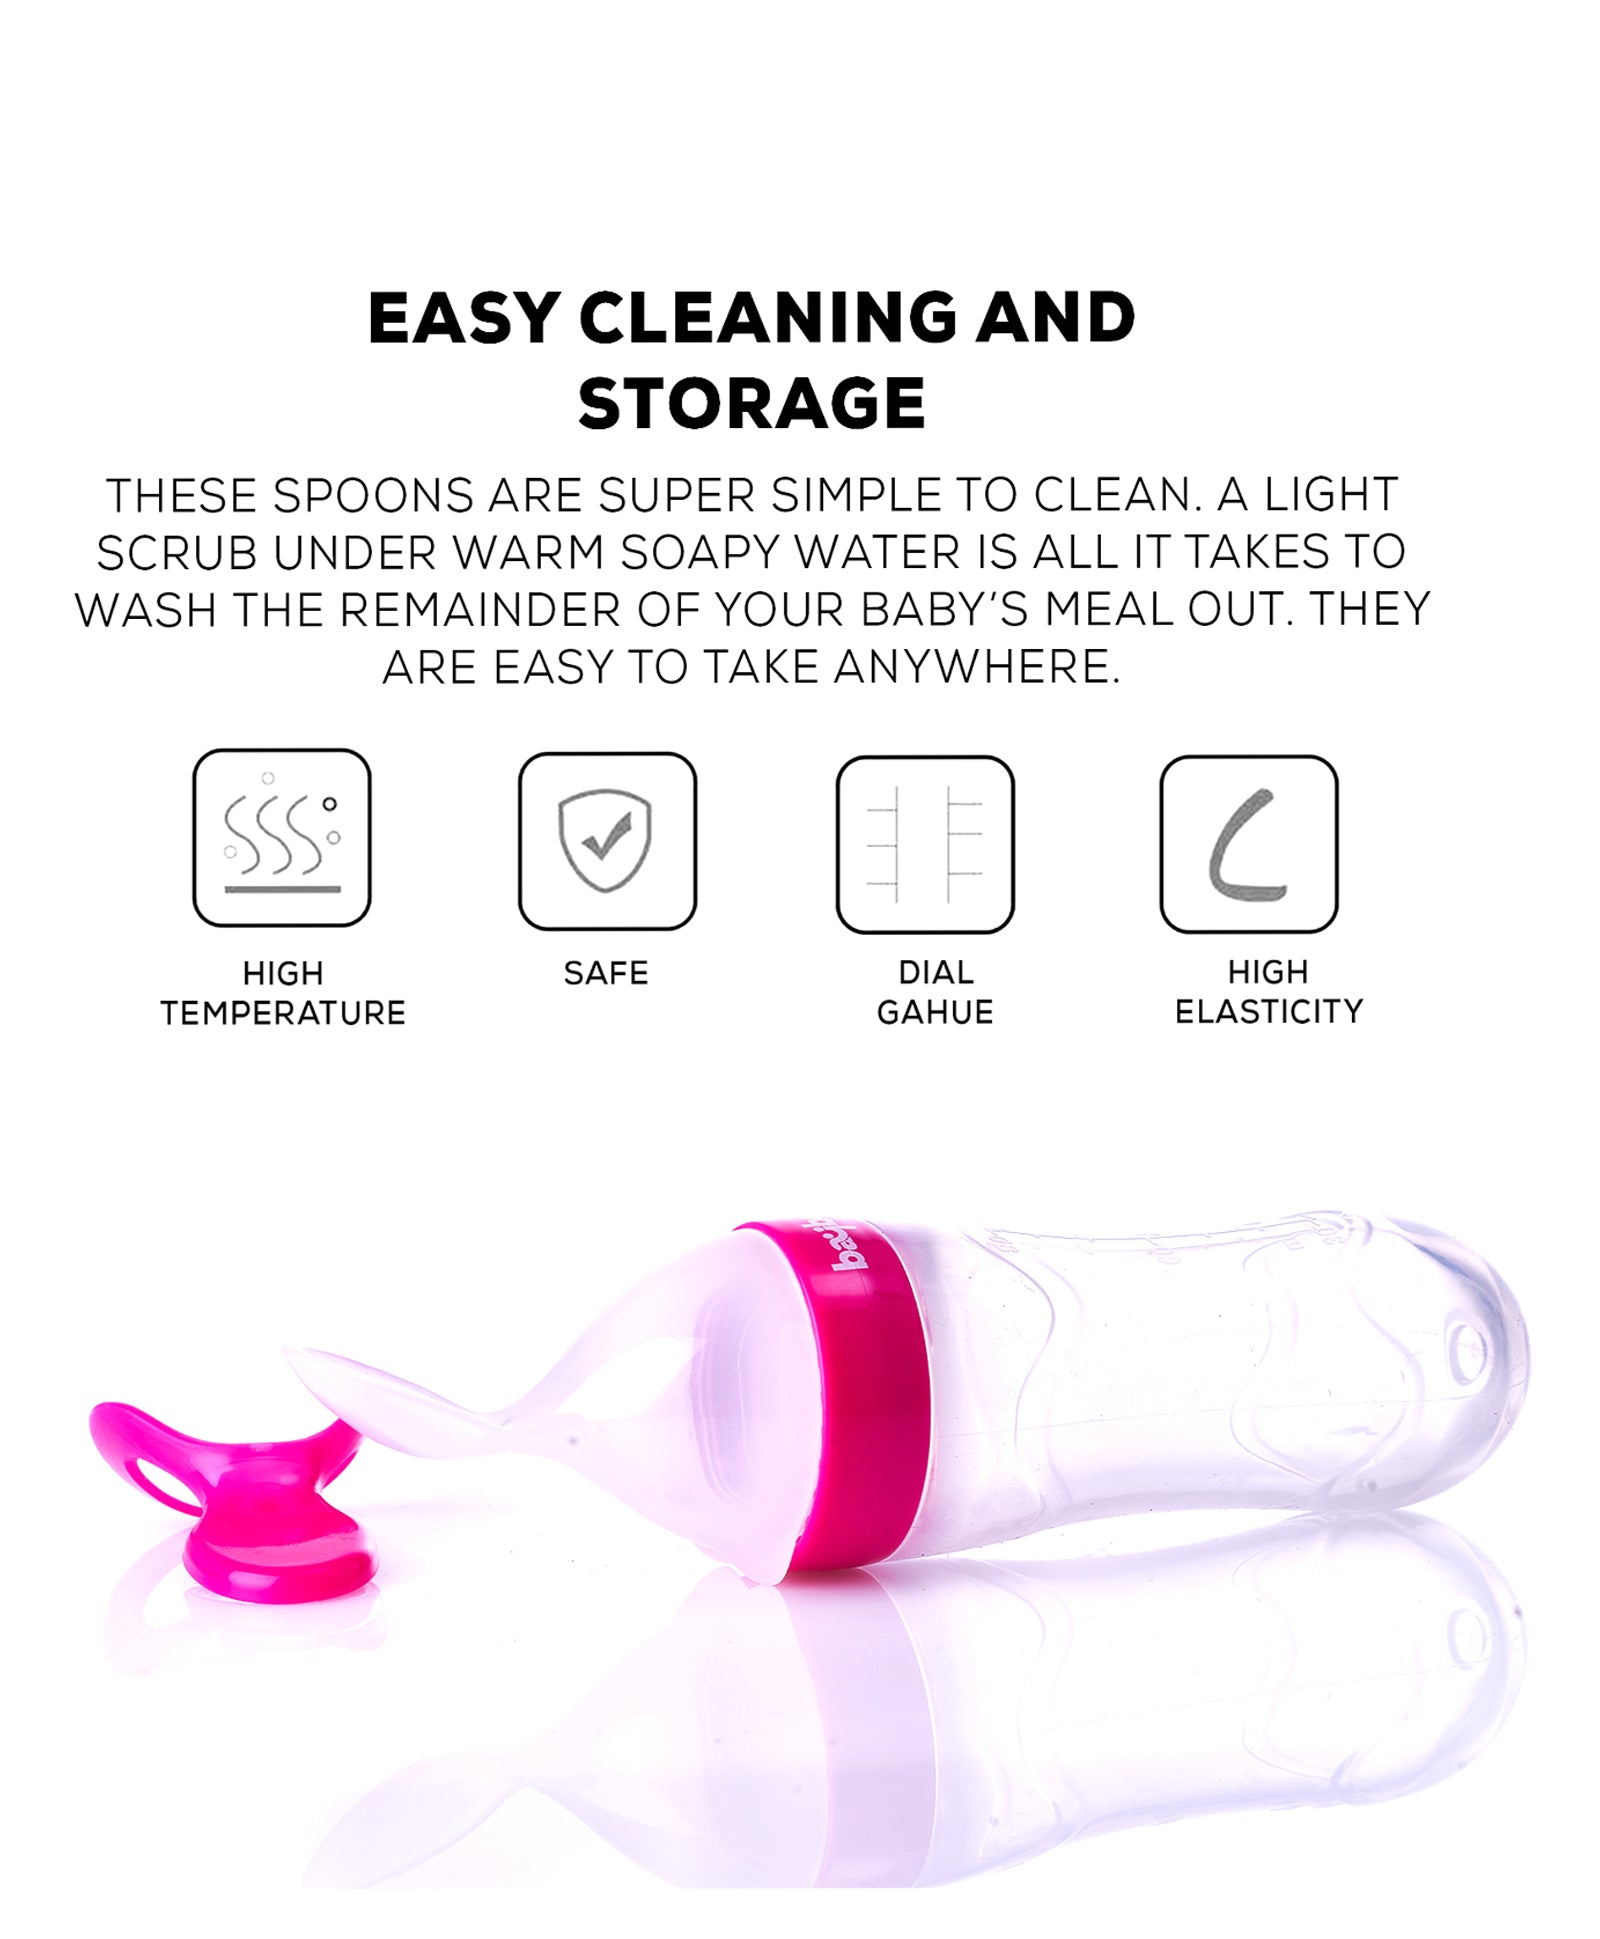 Baby Silicone Squeeze Food Feeder with Measuring Spoon - Pink - The Minikin Store